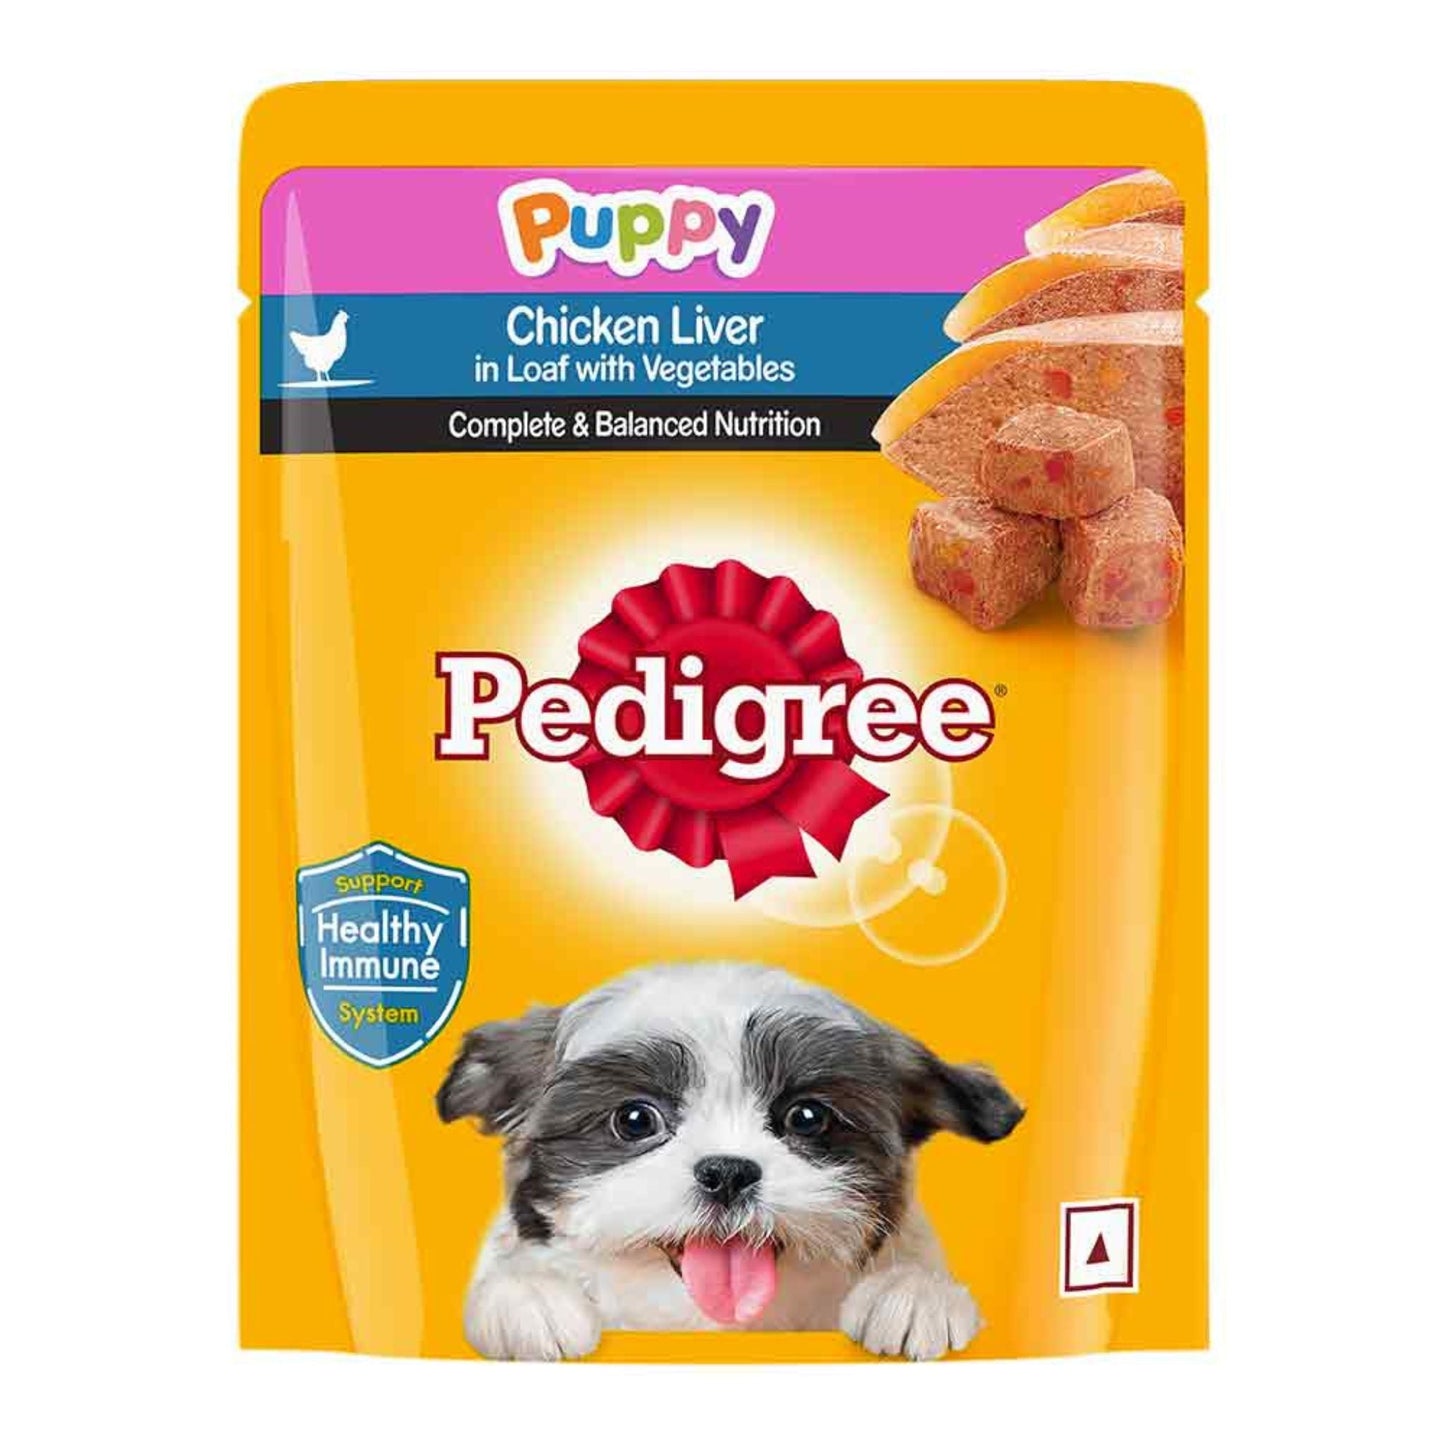 Pedigree Puppy Chicken Liver in Loaf with Vegetables - 70g, Pack of 90